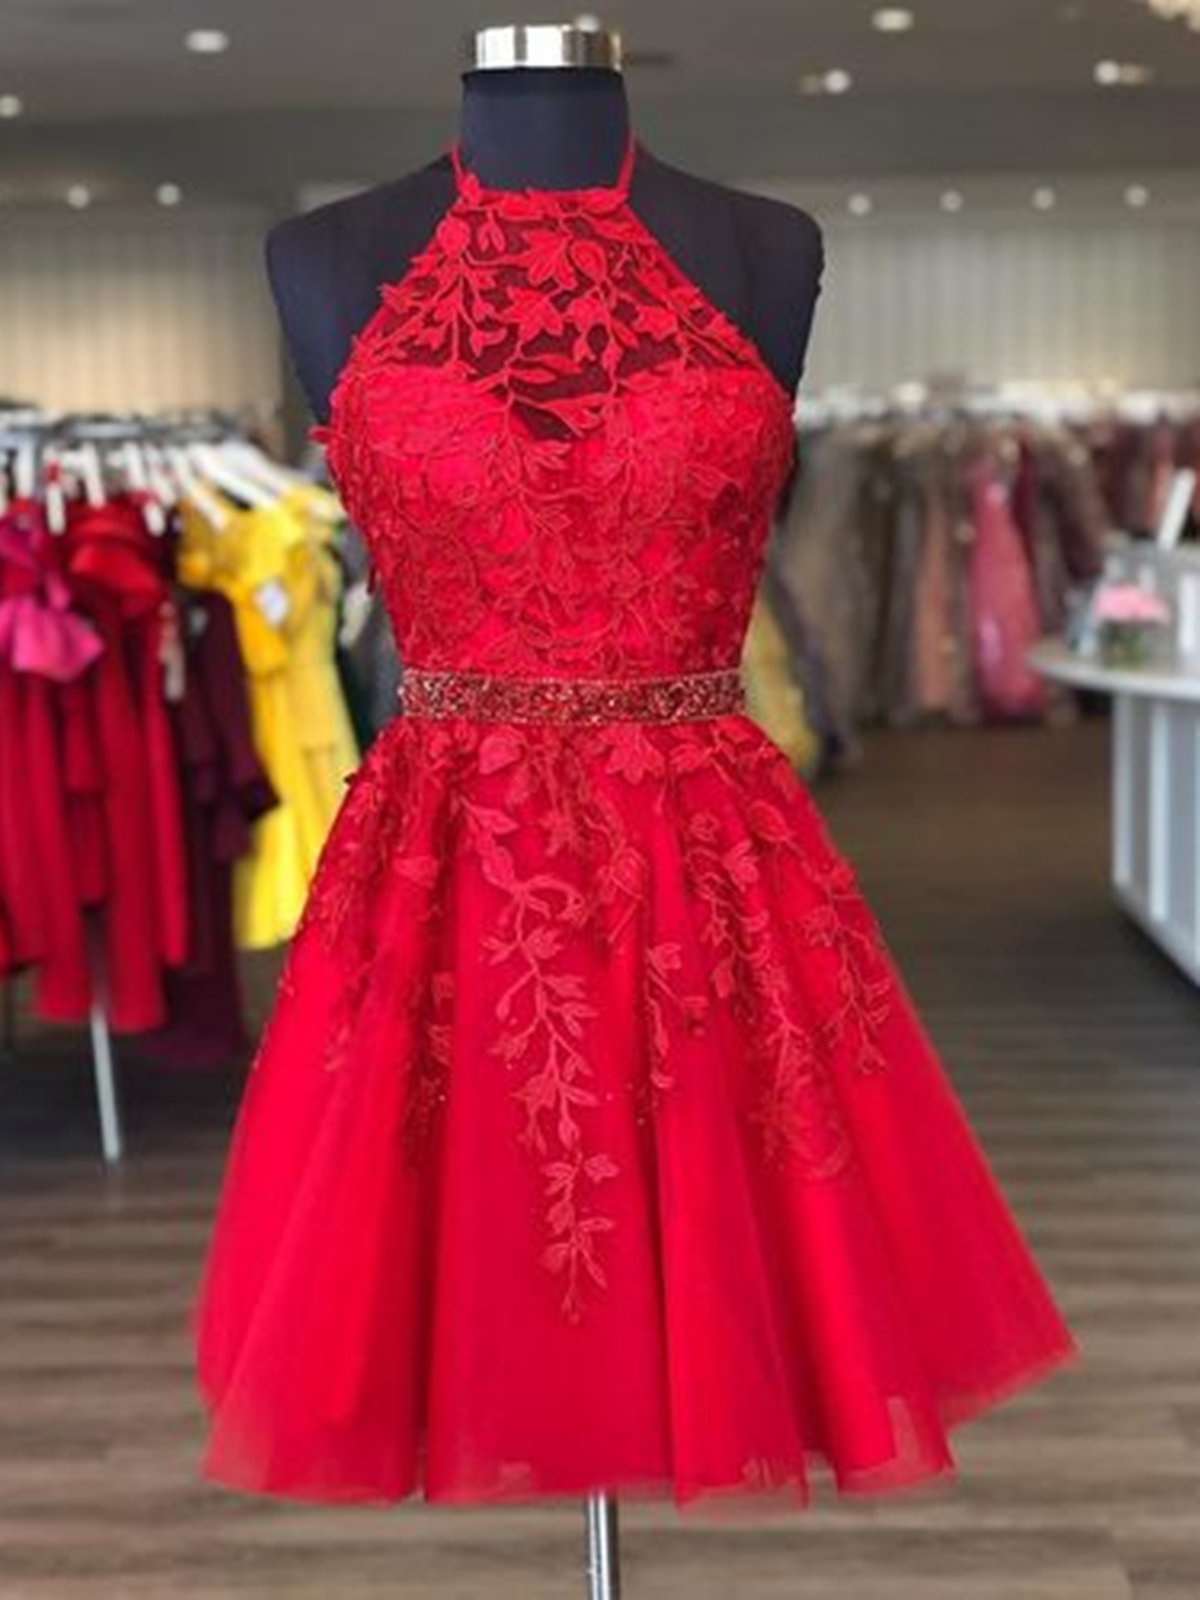 Ball Gown, Halter Neck Short Red Lace Prom Dresses, Short Red Lace Formal Homecoming Dresses